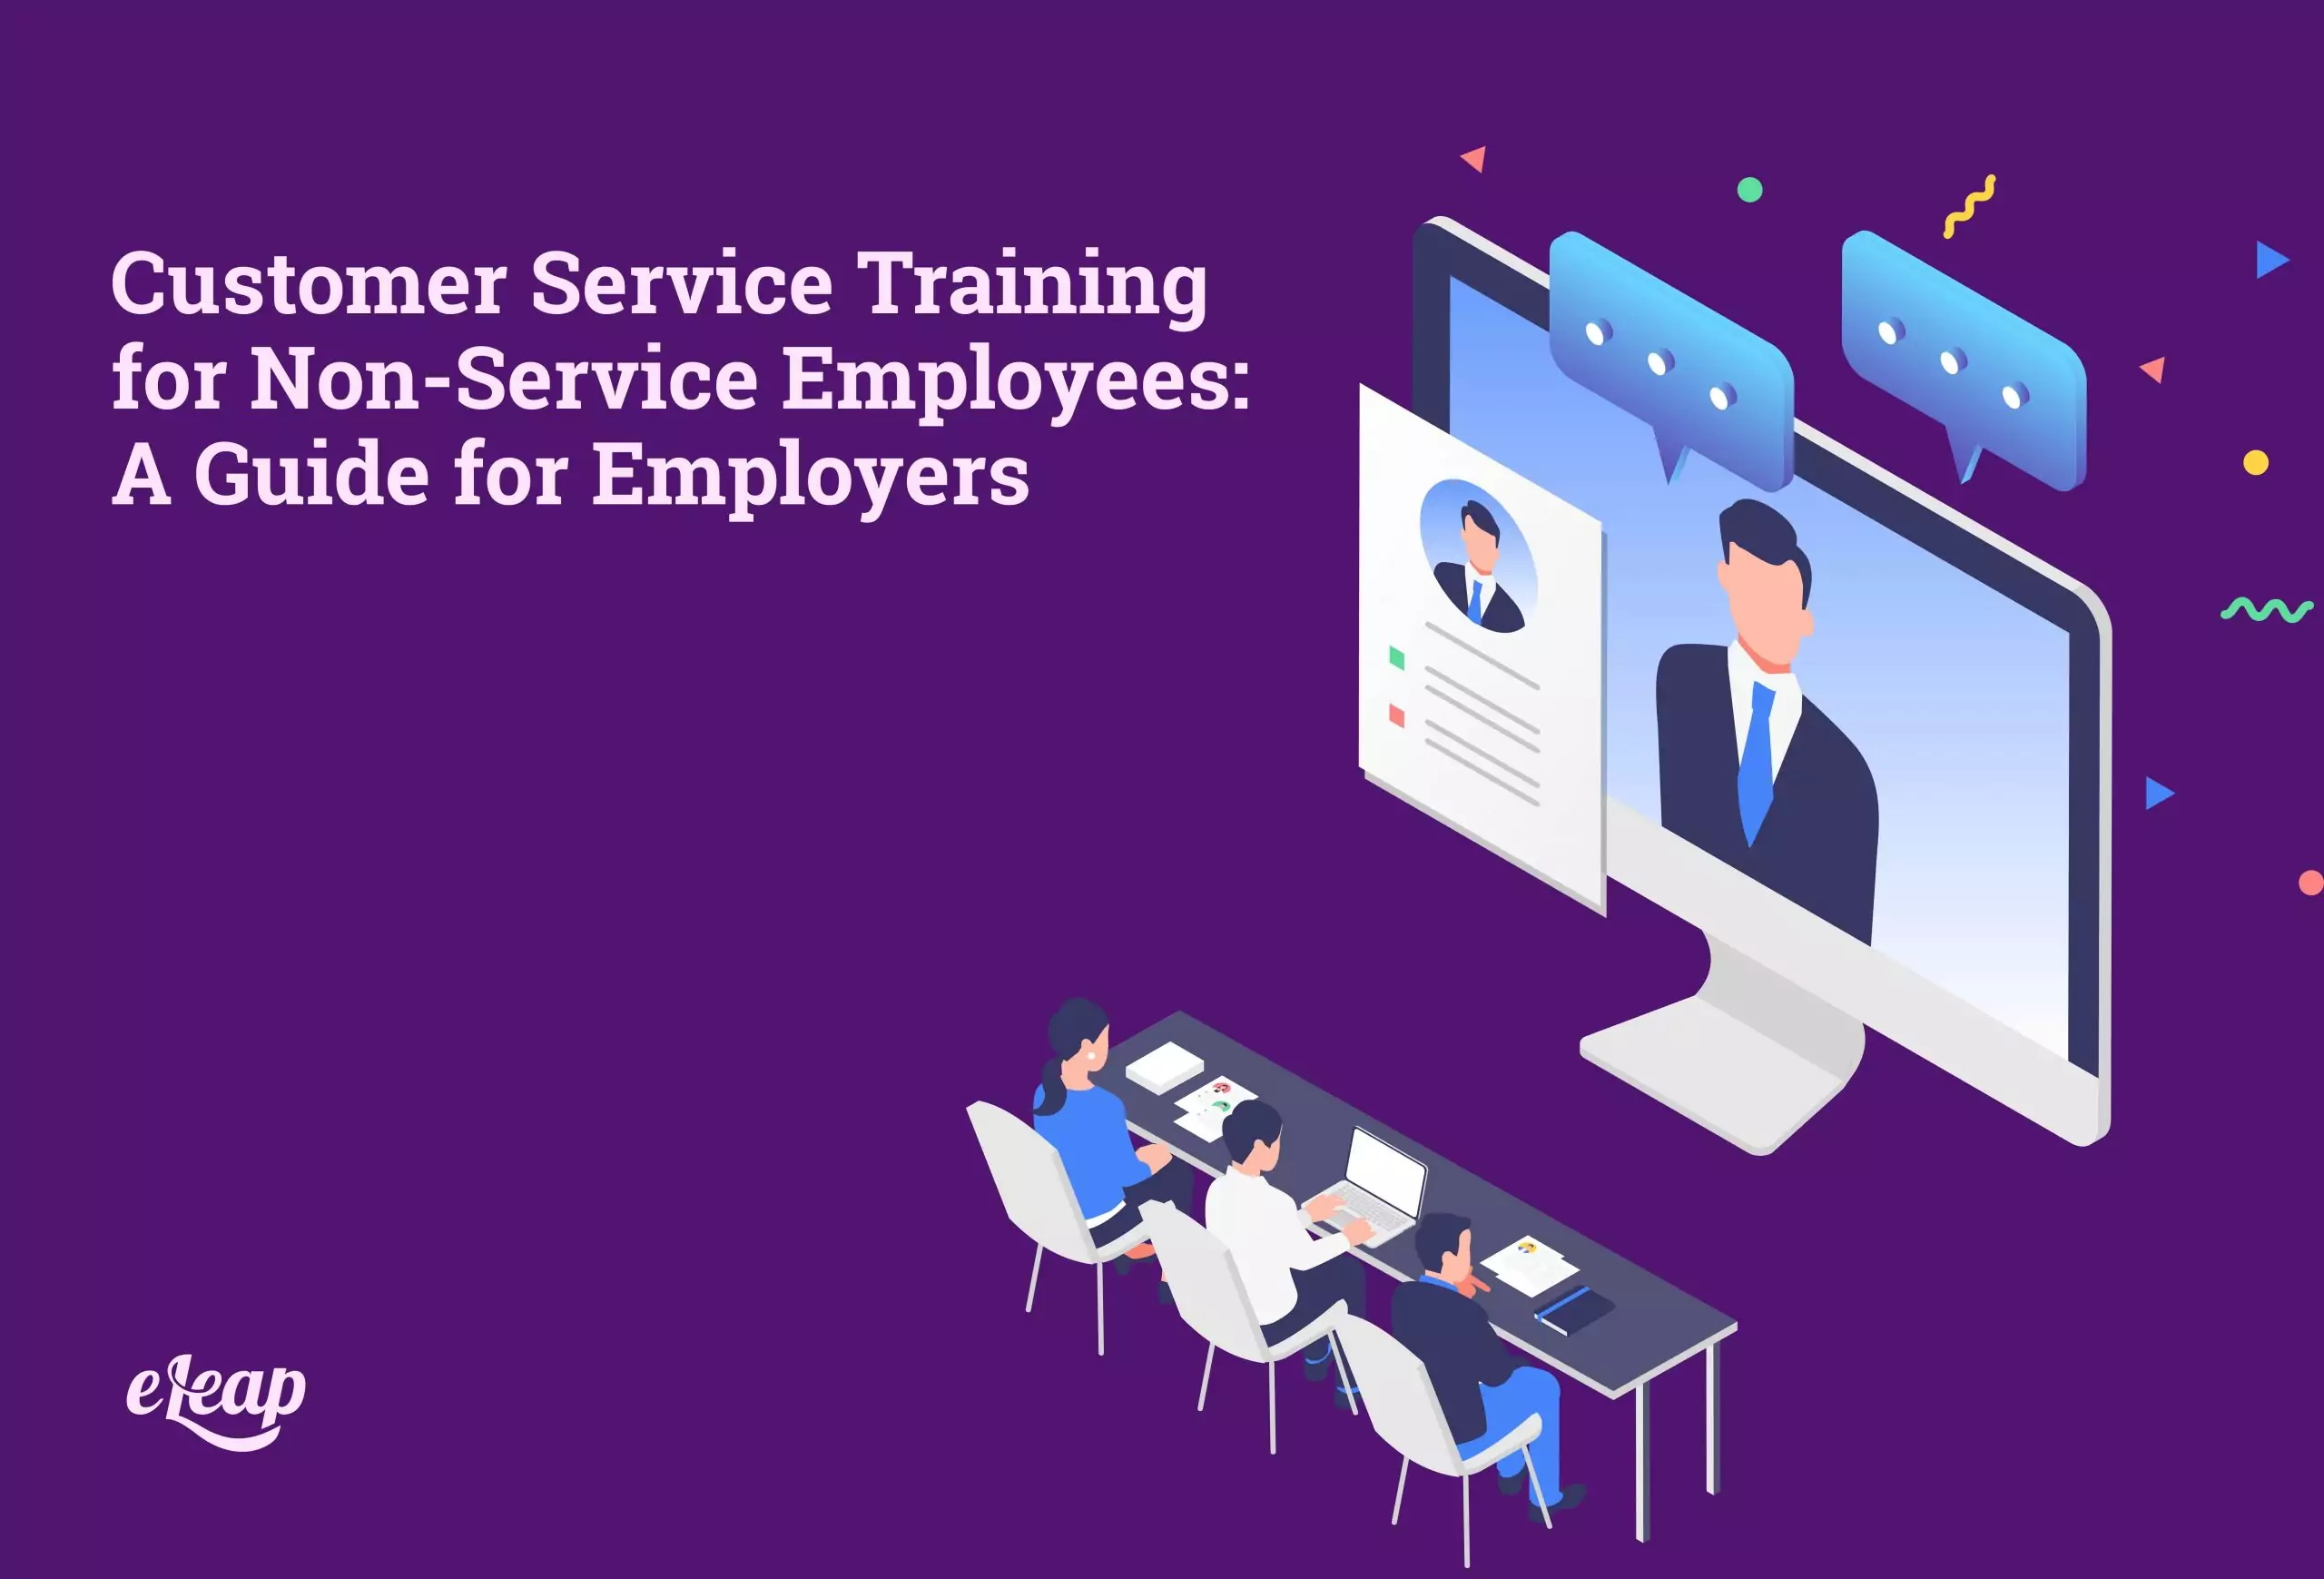 Customer Service Training for Non-Service Employees: A Guide for Employers